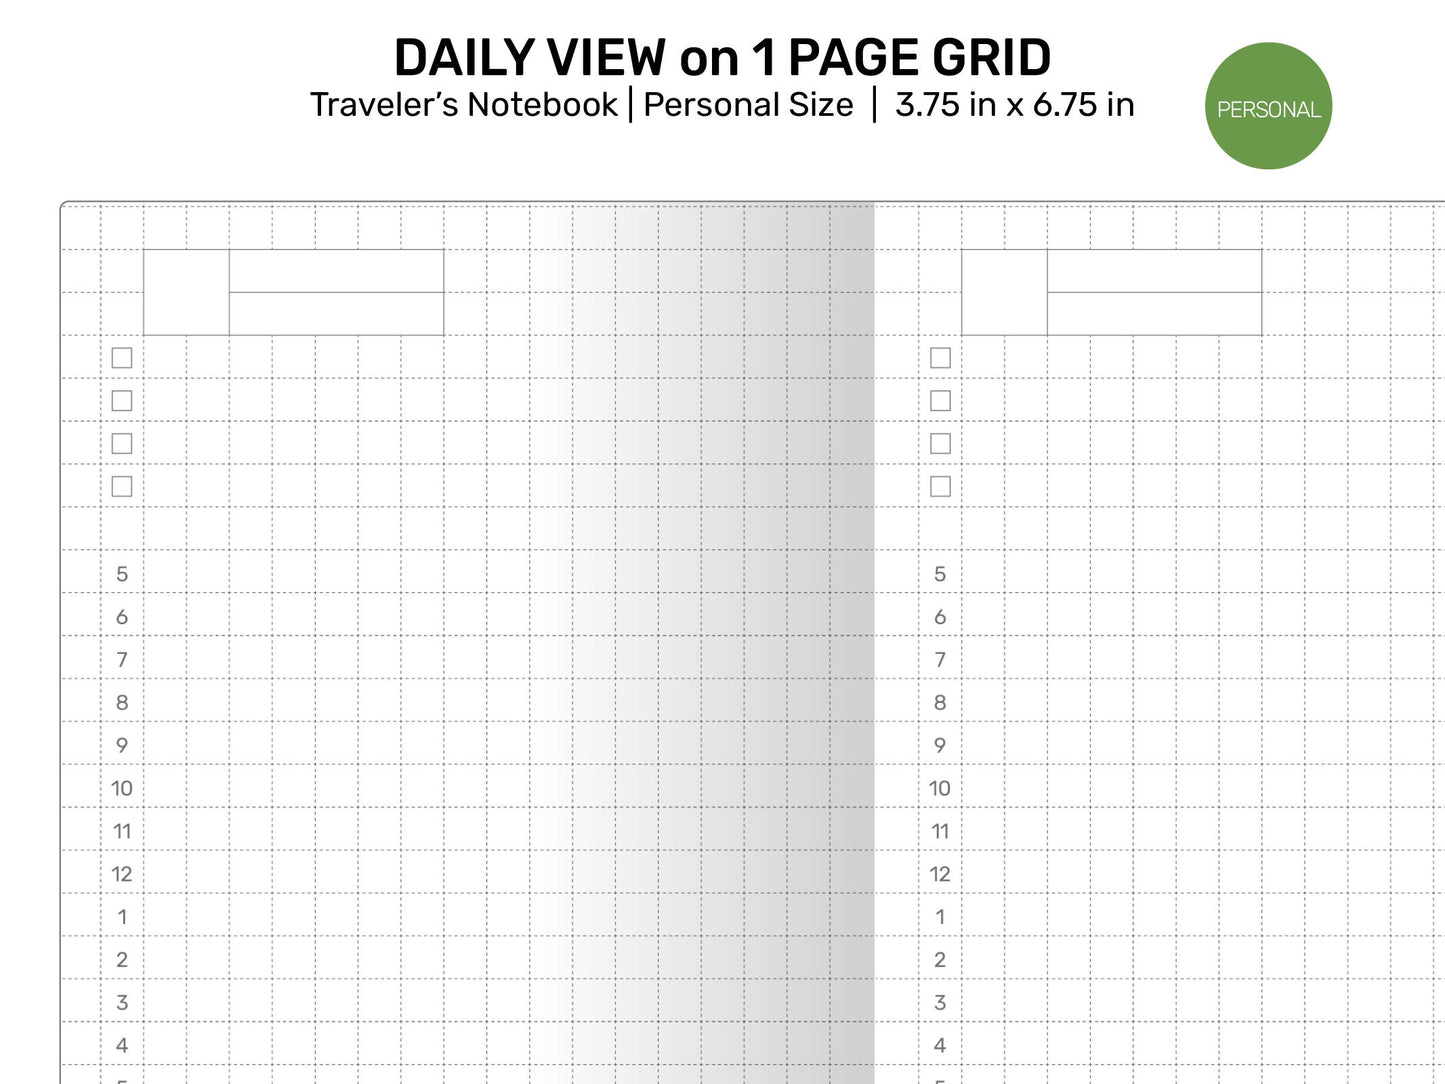 Personal Size TN GRID Daily View Do1P Printable Refill Traveler's Notebook Insert Minimalist Functional